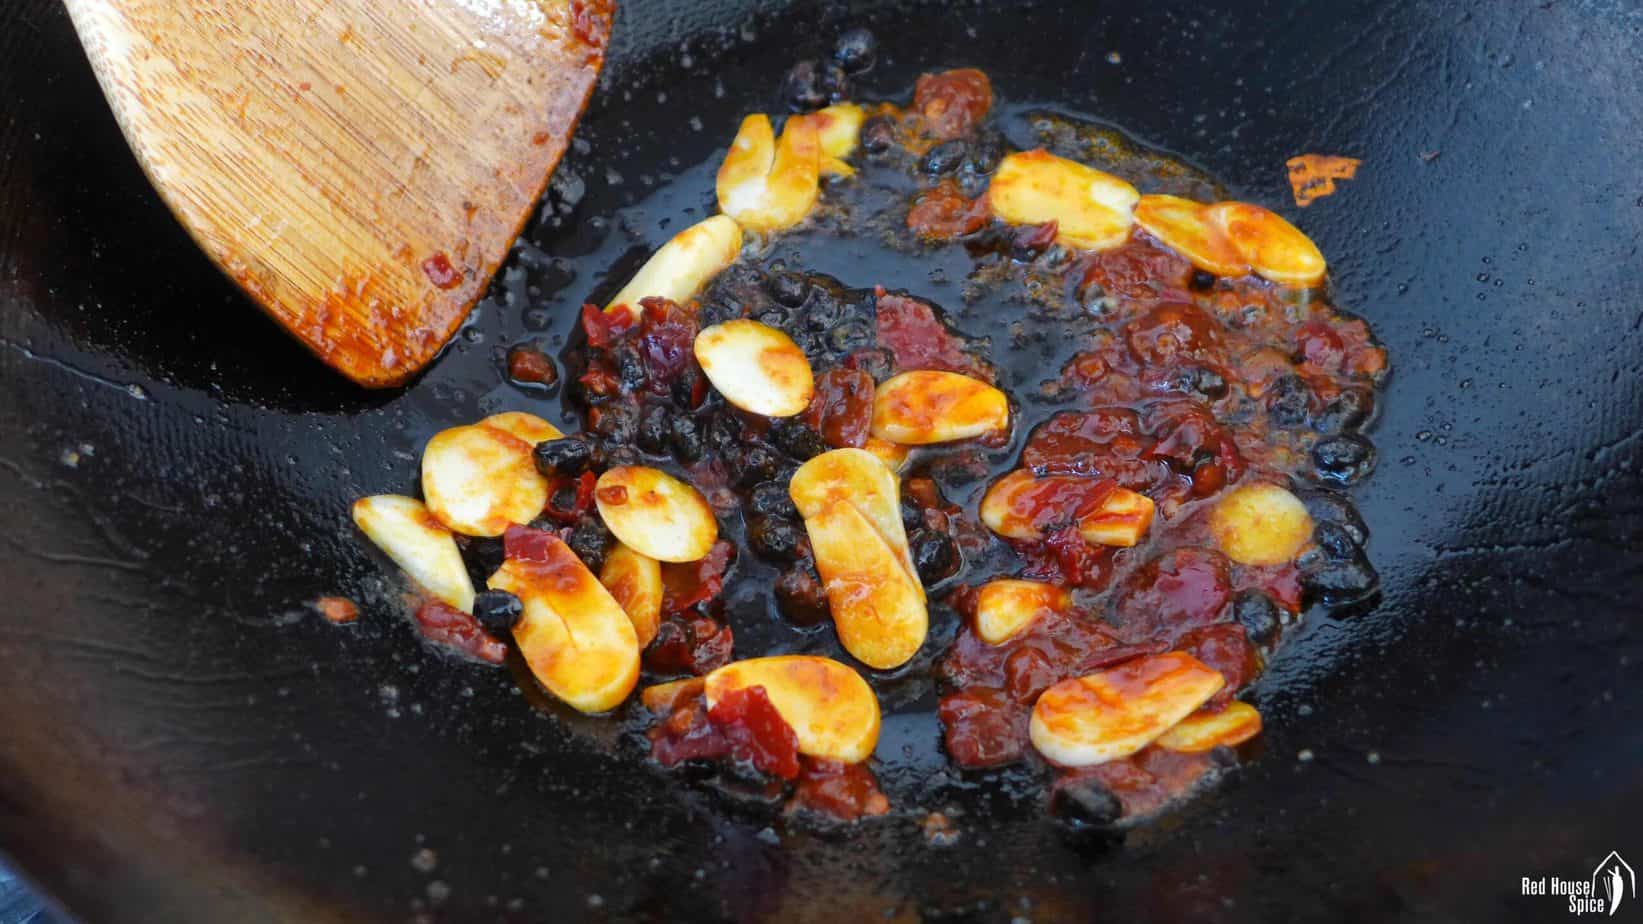 Sizzle chili bean paste, black beans and garlic in oil